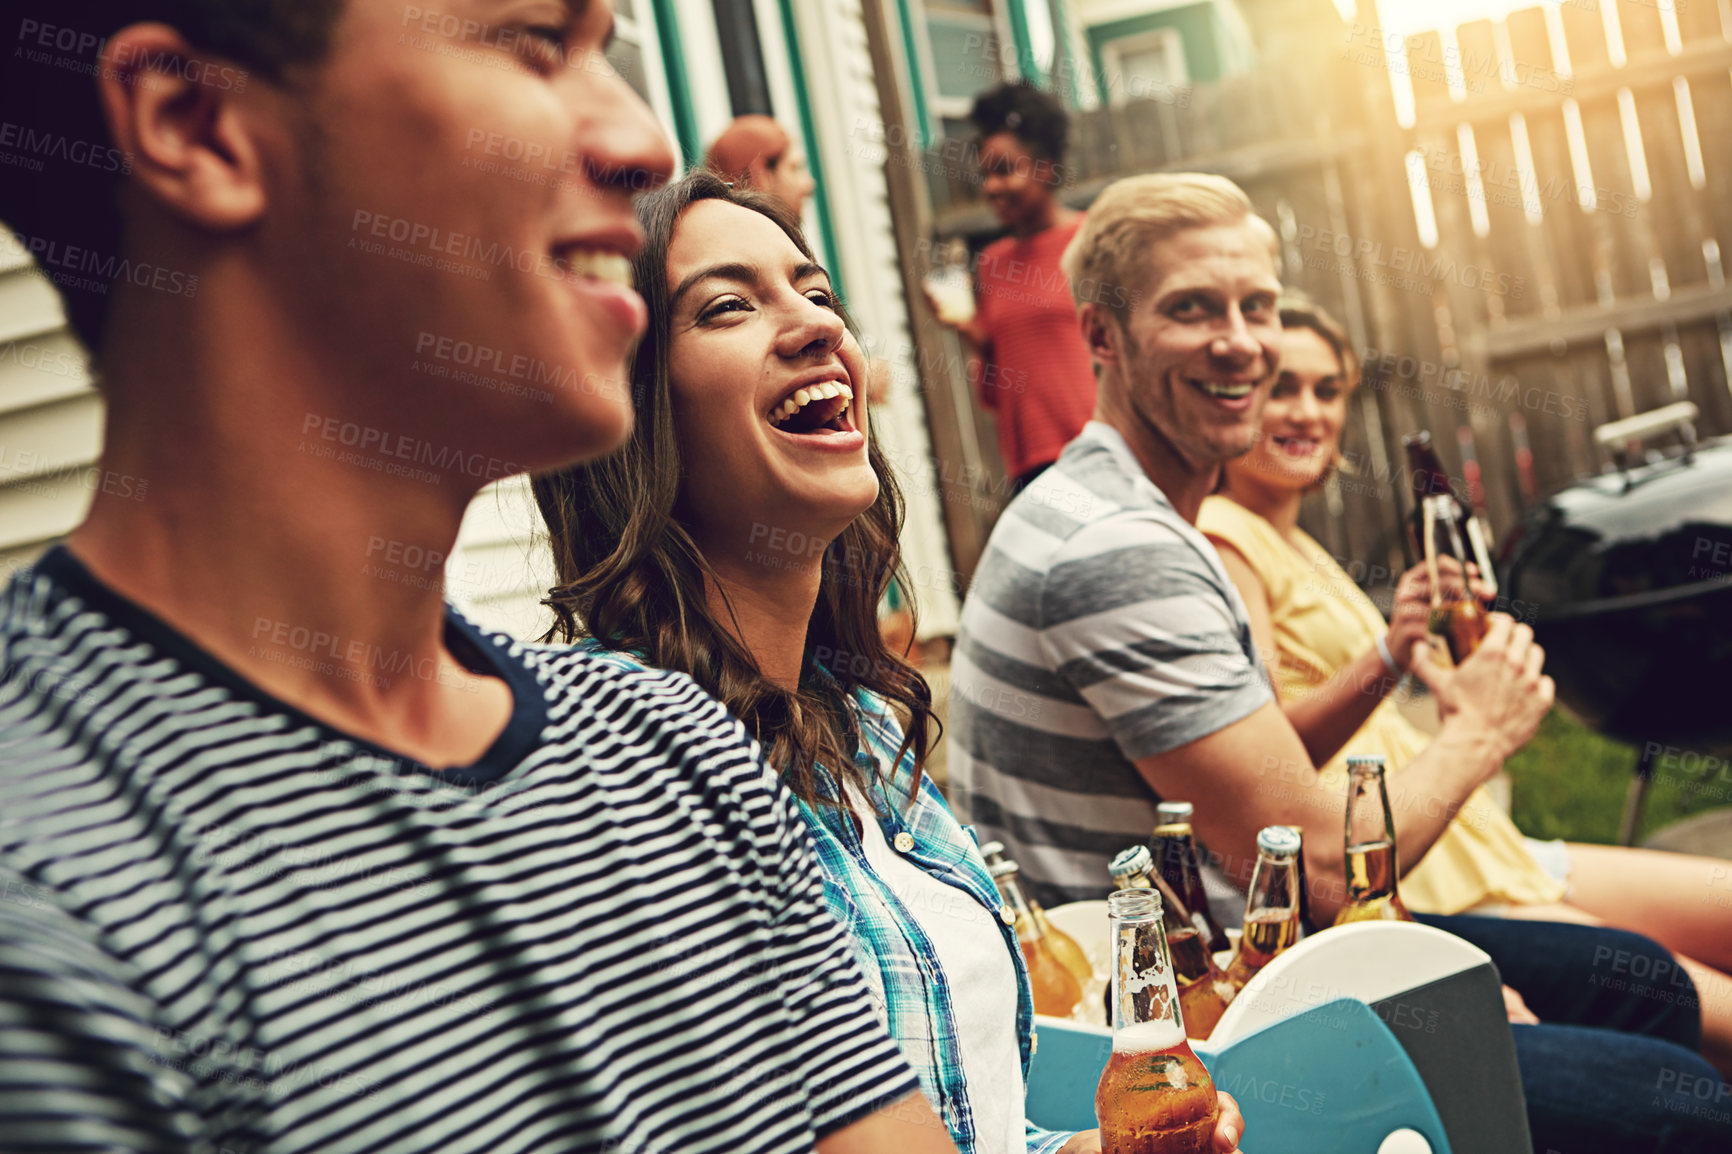 Buy stock photo Shot of a group of friends enjoying a party outdoors